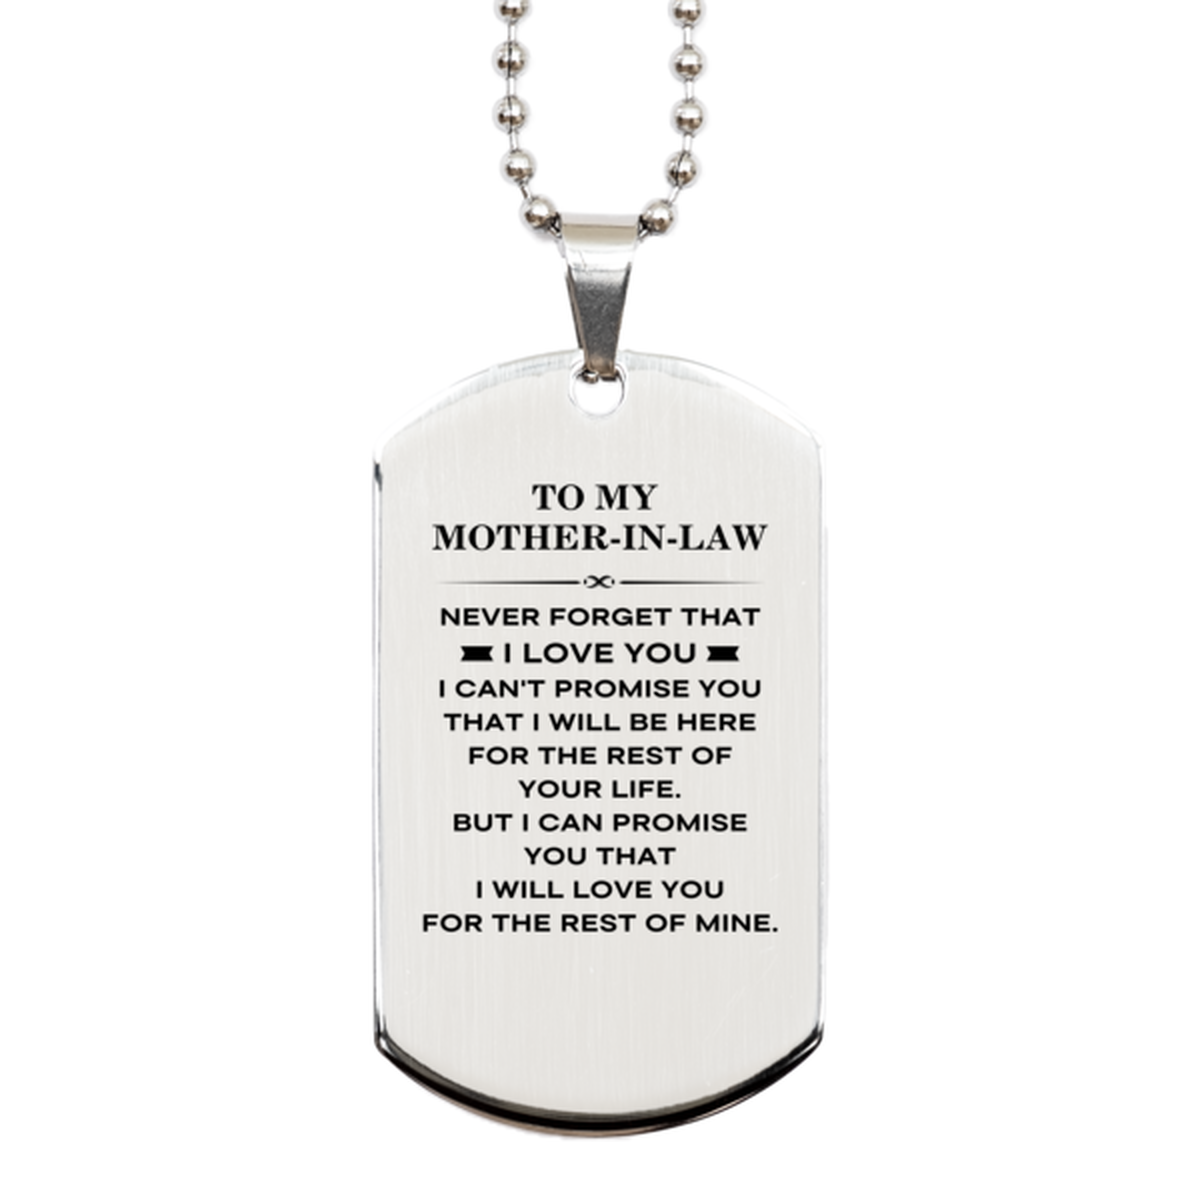 To My Mother-In-Law Gifts, I will love you for the rest of mine, Love Mother-In-Law Dog Tag Necklace, Birthday Christmas Unique Silver Dog Tag For Mother-In-Law